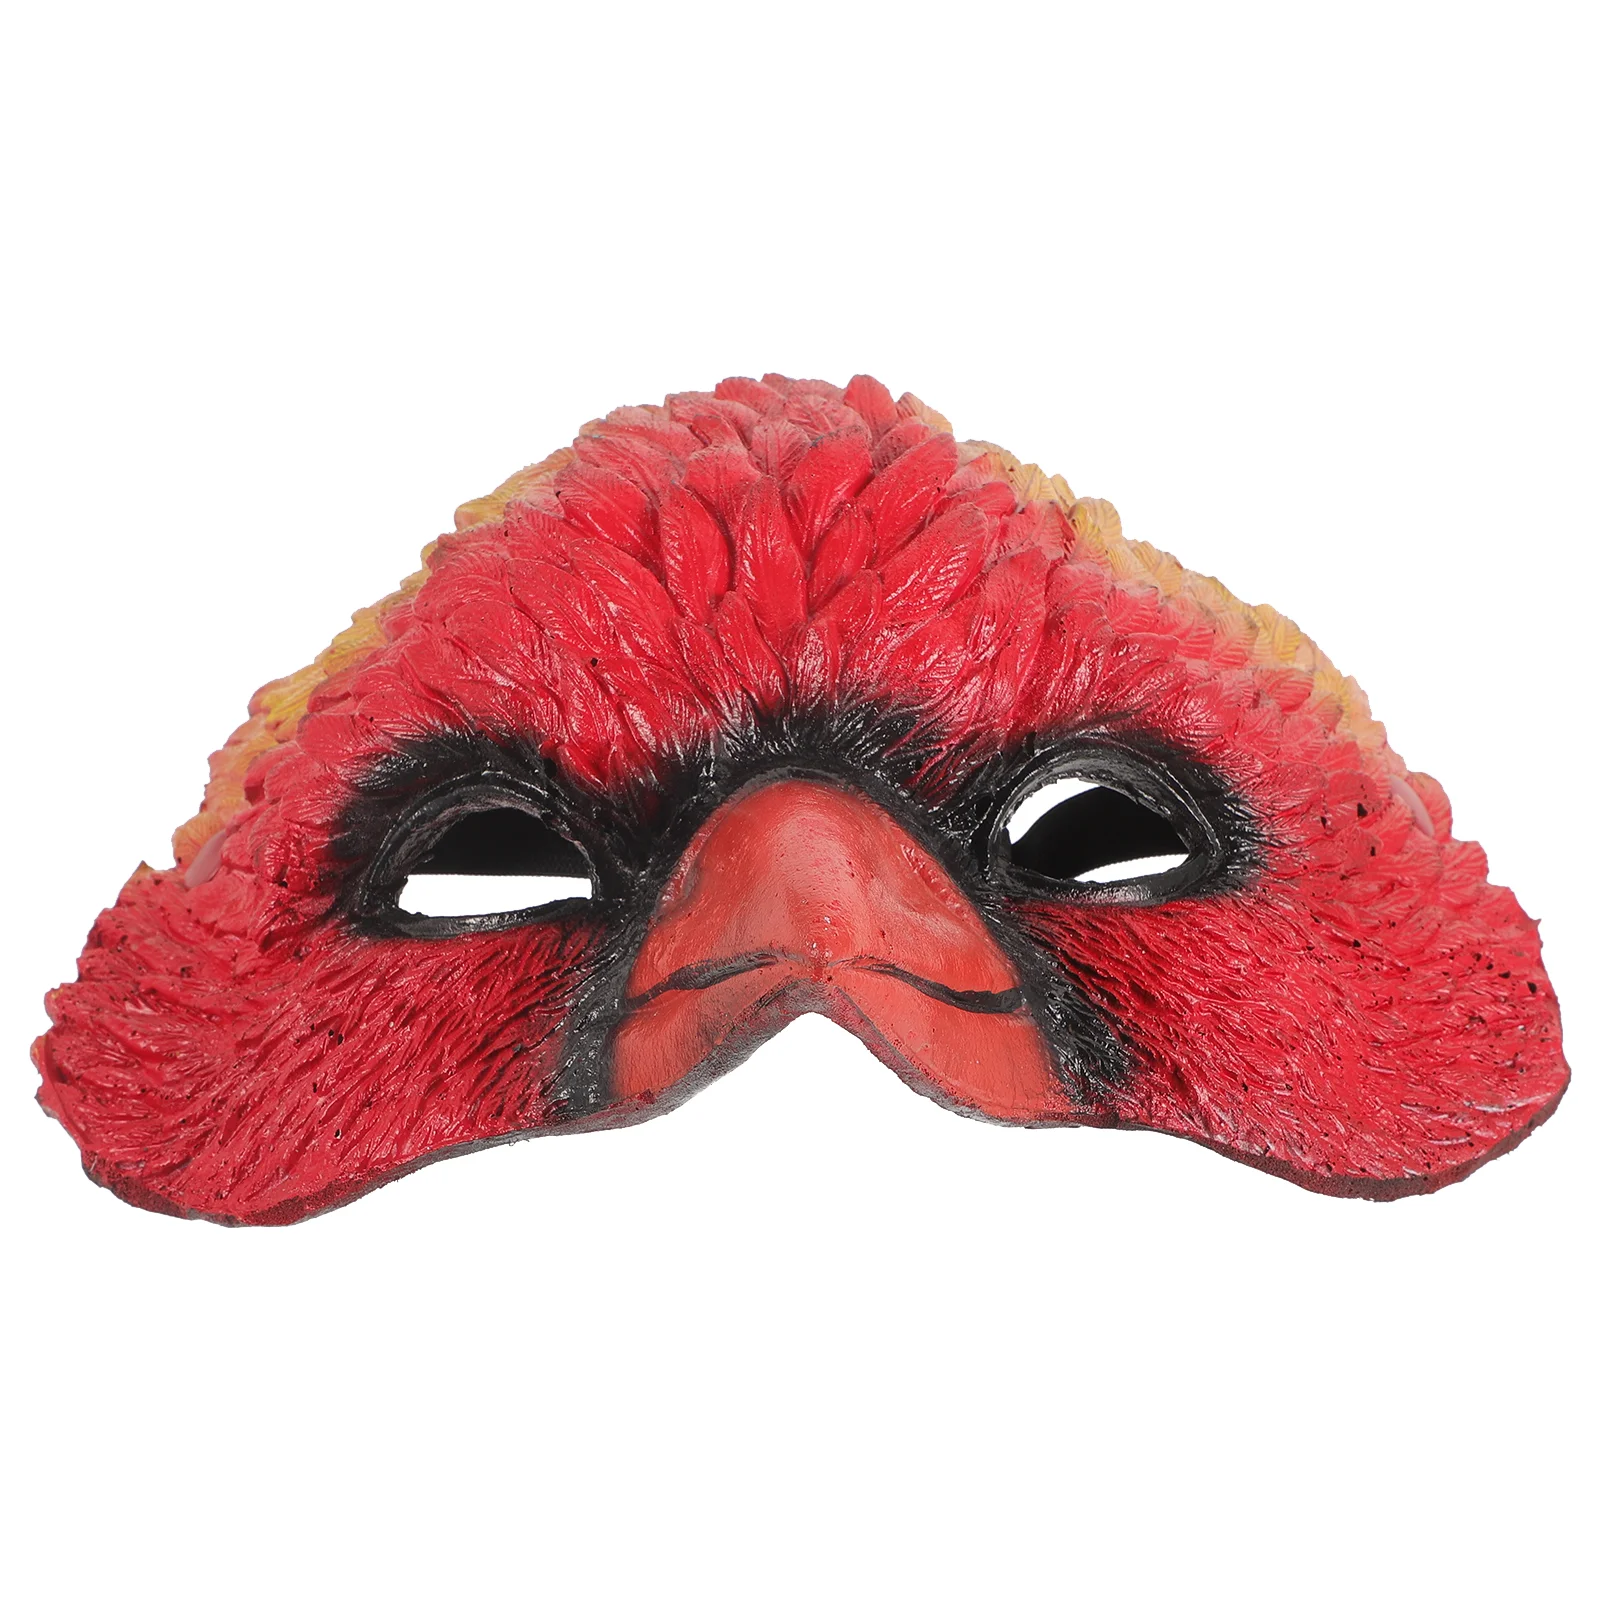 funny green fish full head mask fish head party mask green mouth fish latex mask costume cosplay animal prop masks party supplie Bird Head Mask Role Play Outfits Make up Face Animal Masks for Party Pu Foam Cosplay Costume